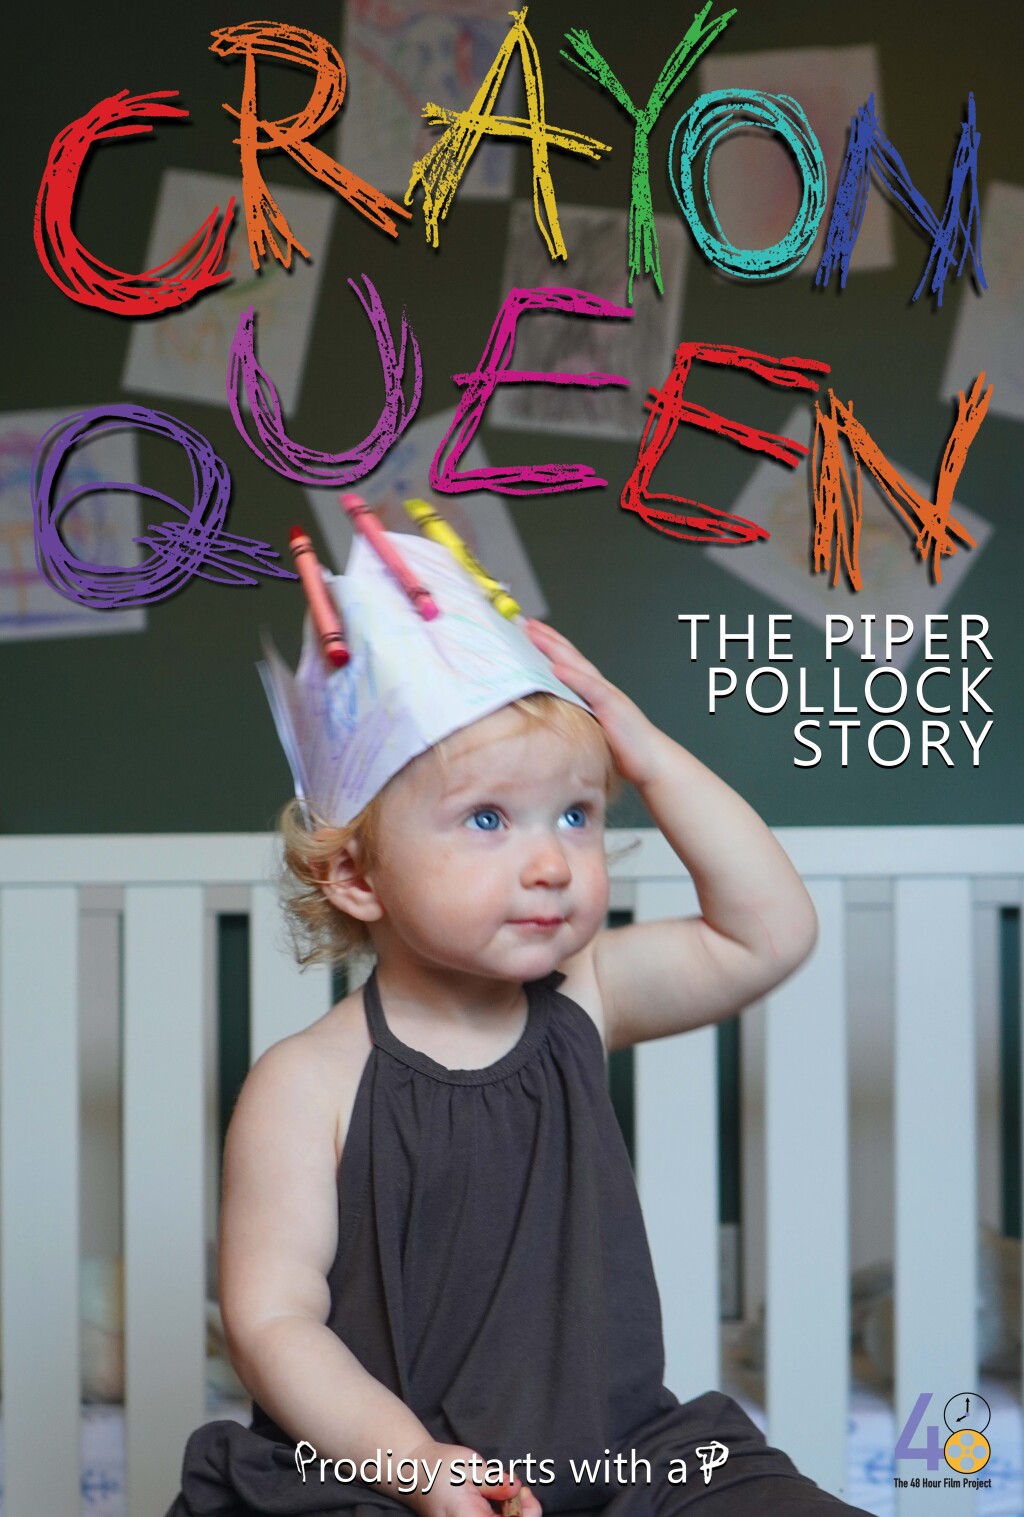 Filmposter for Crayon Queen: The Piper Pollock Story